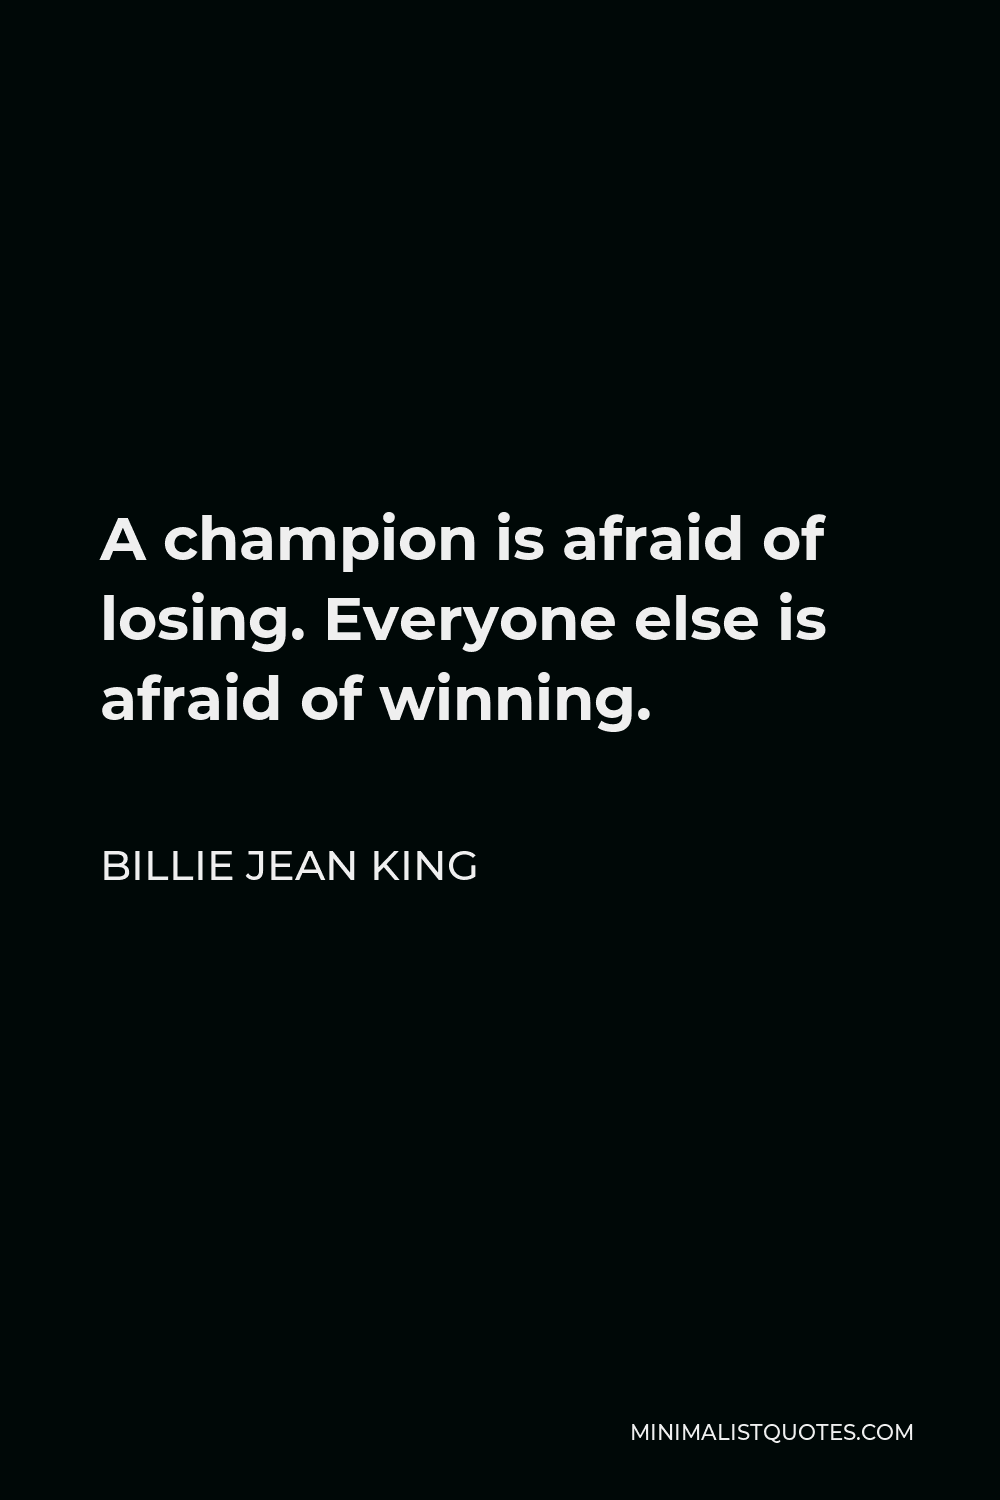 Billie Jean King Quote - A champion is afraid of losing. Everyone else is afraid of winning.